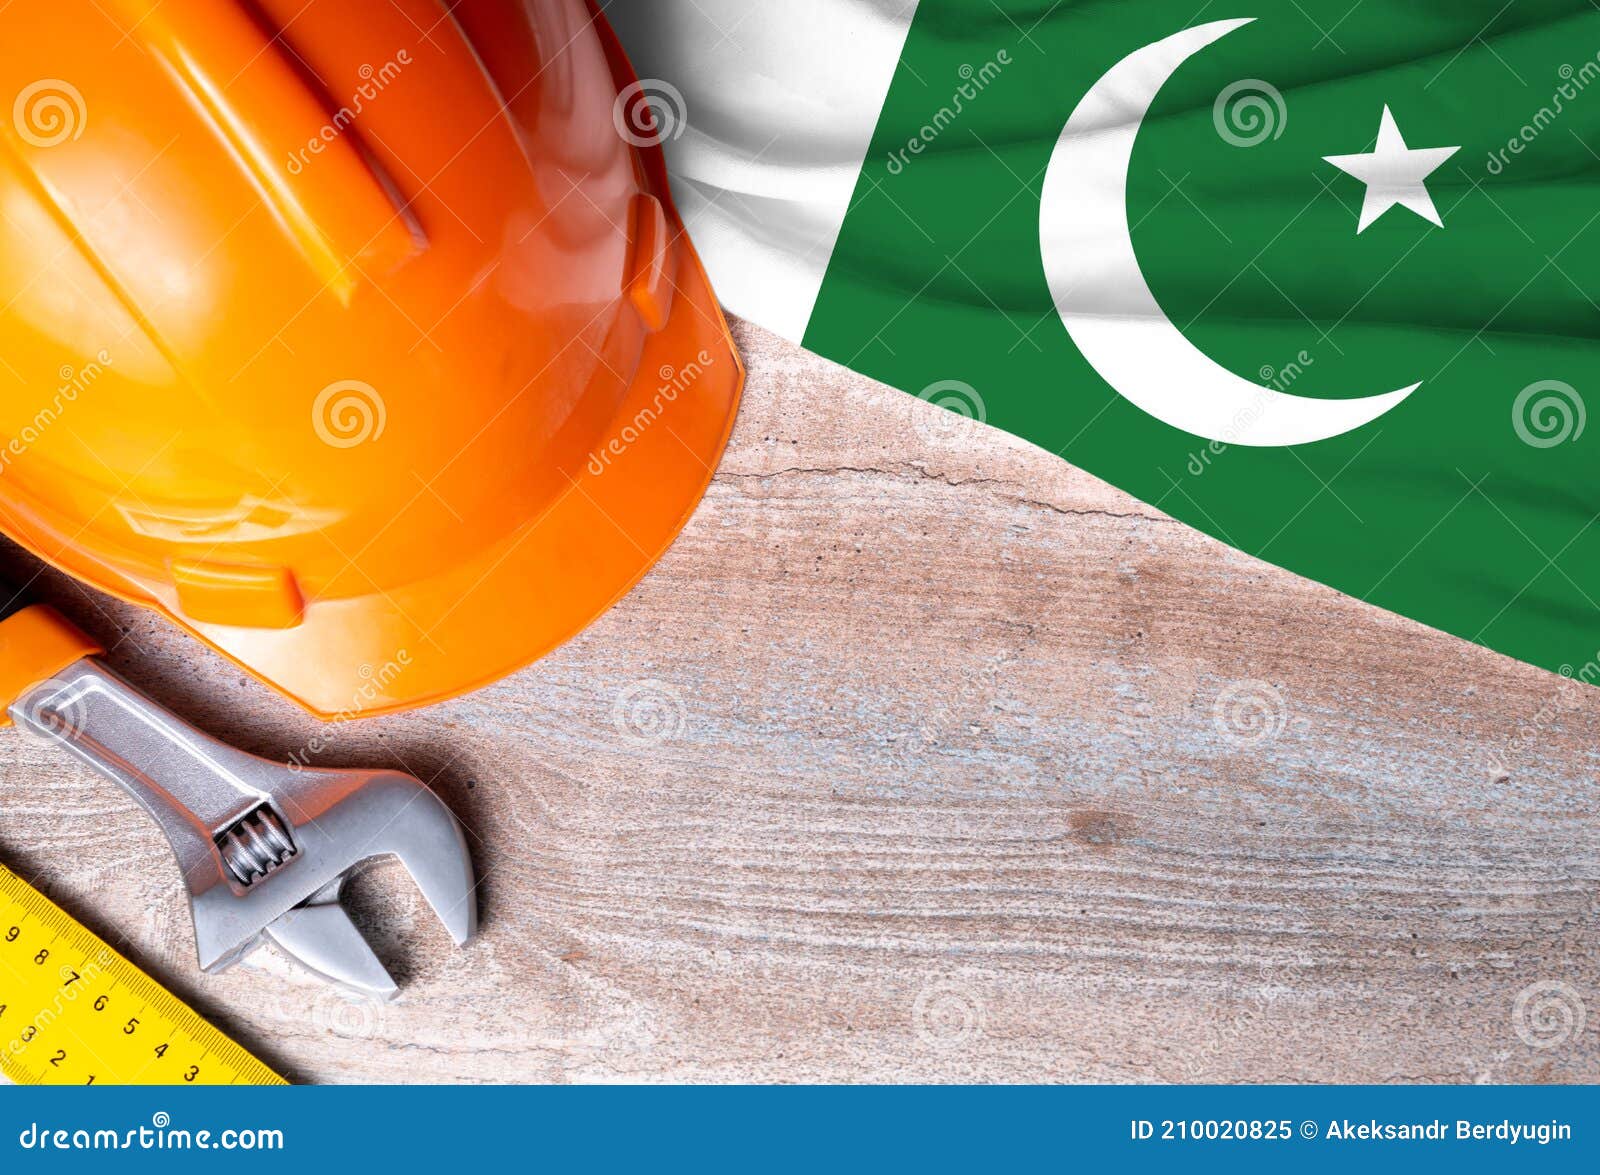 Construction Worker Pakistan Photos Free Royalty Free Stock Photos From Dreamstime